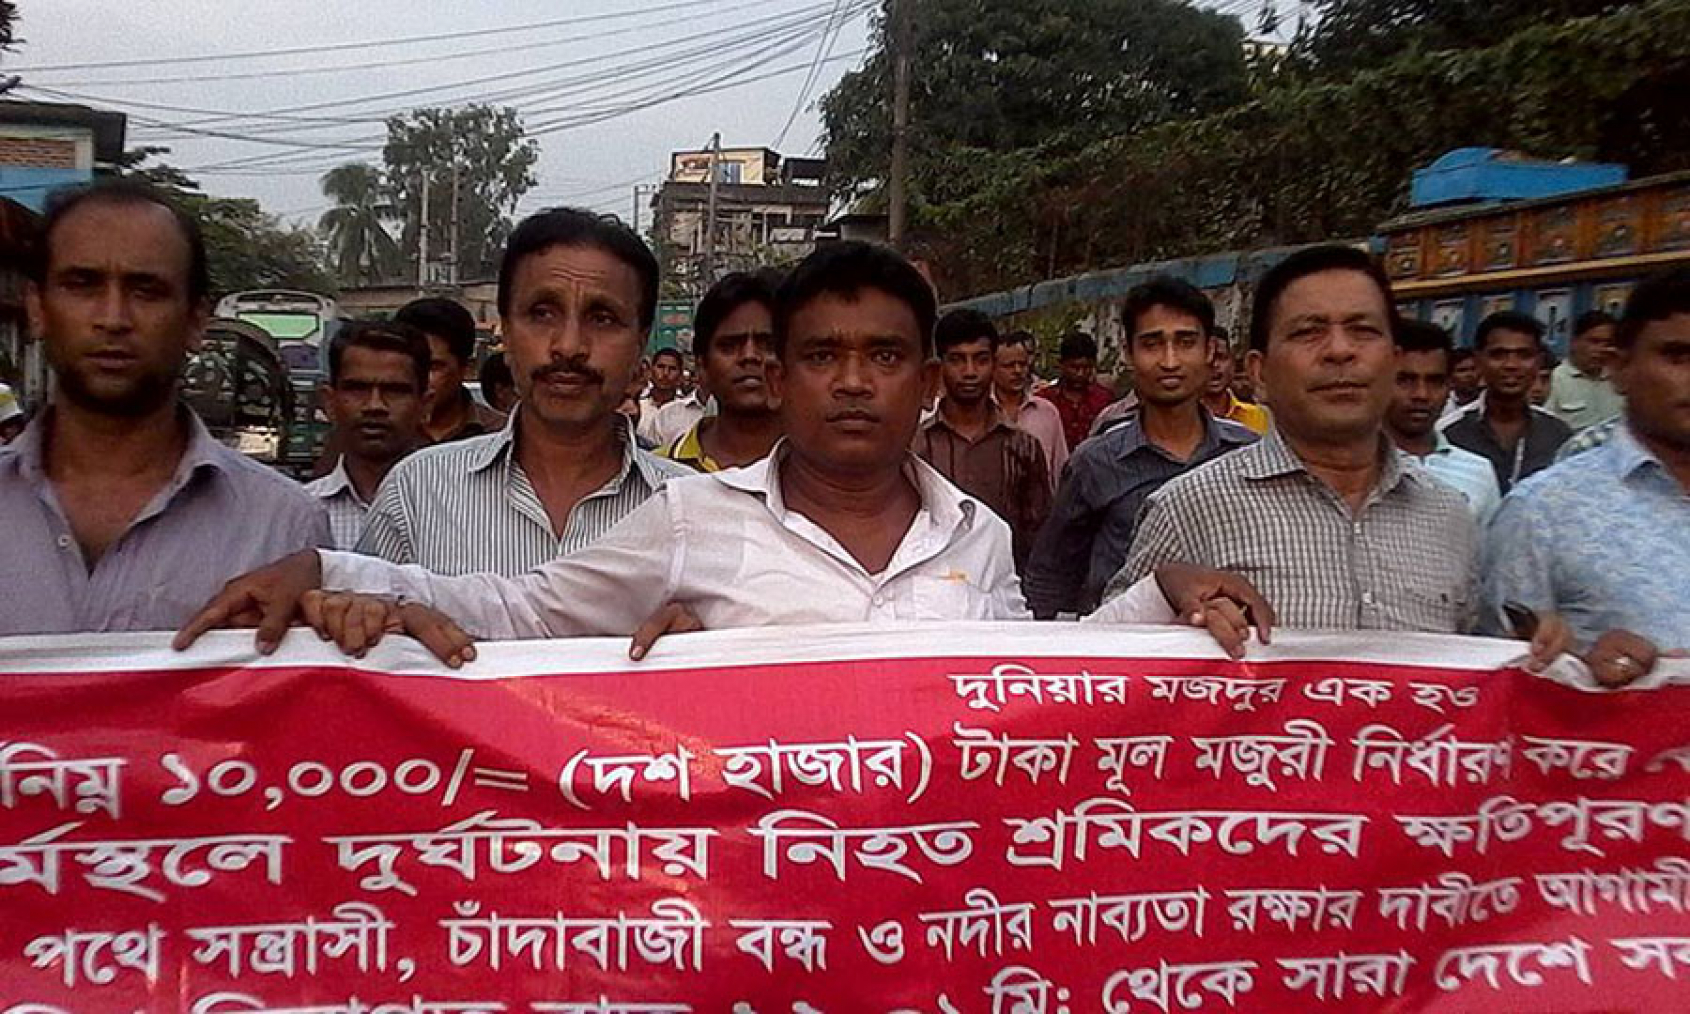 Inland waterway workers’ action led to successful agreement, Bangladesh